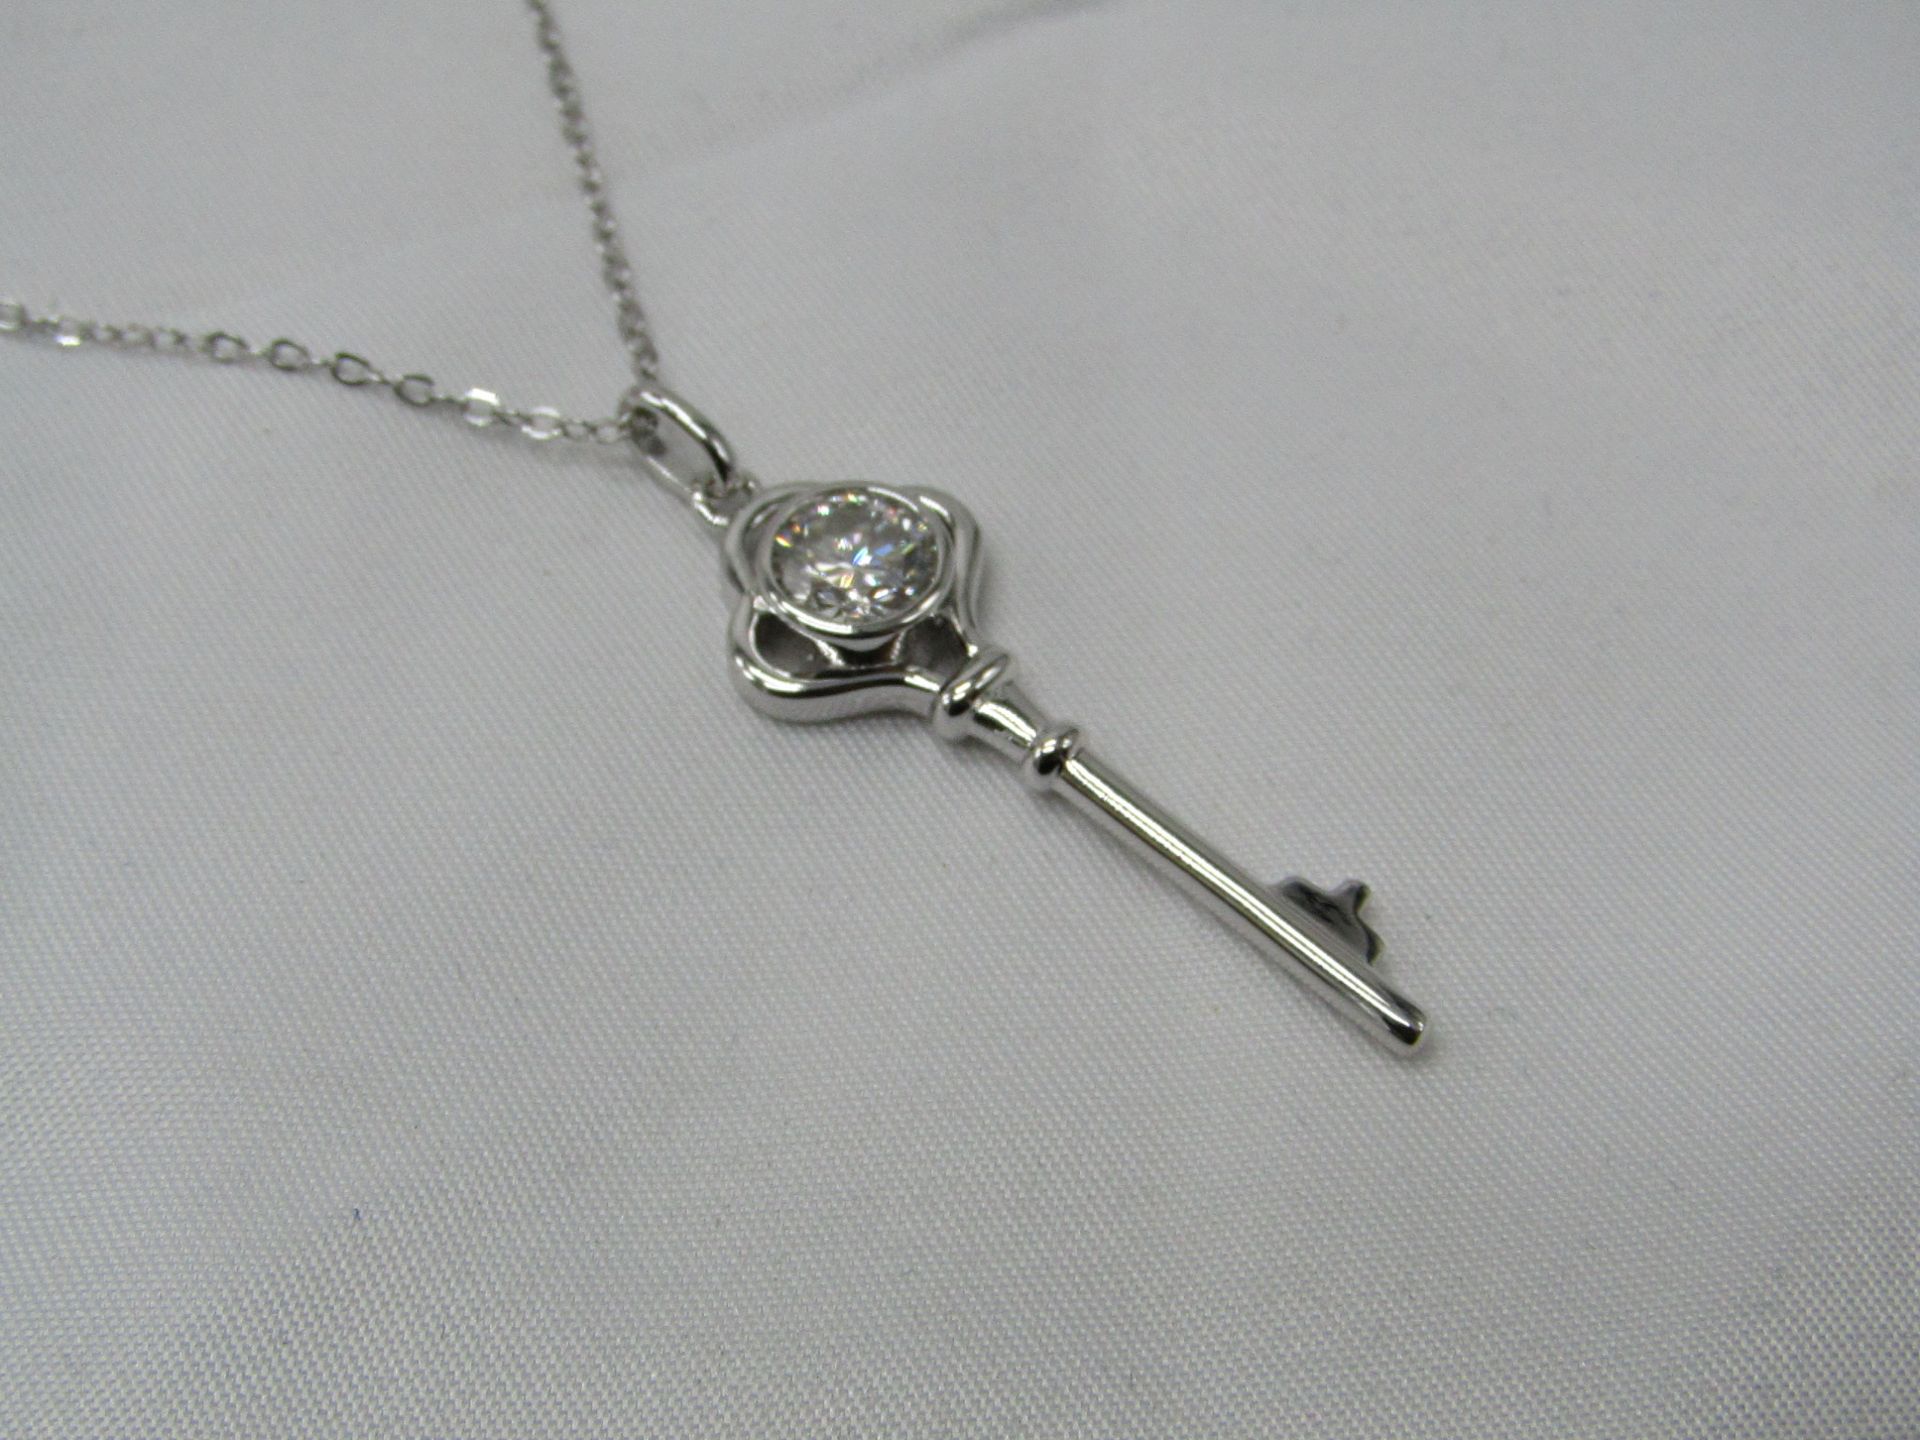 1 Carat Round Brilliant Cut Moissanite stone in a 925 Silver setting and Necklace, new and comes